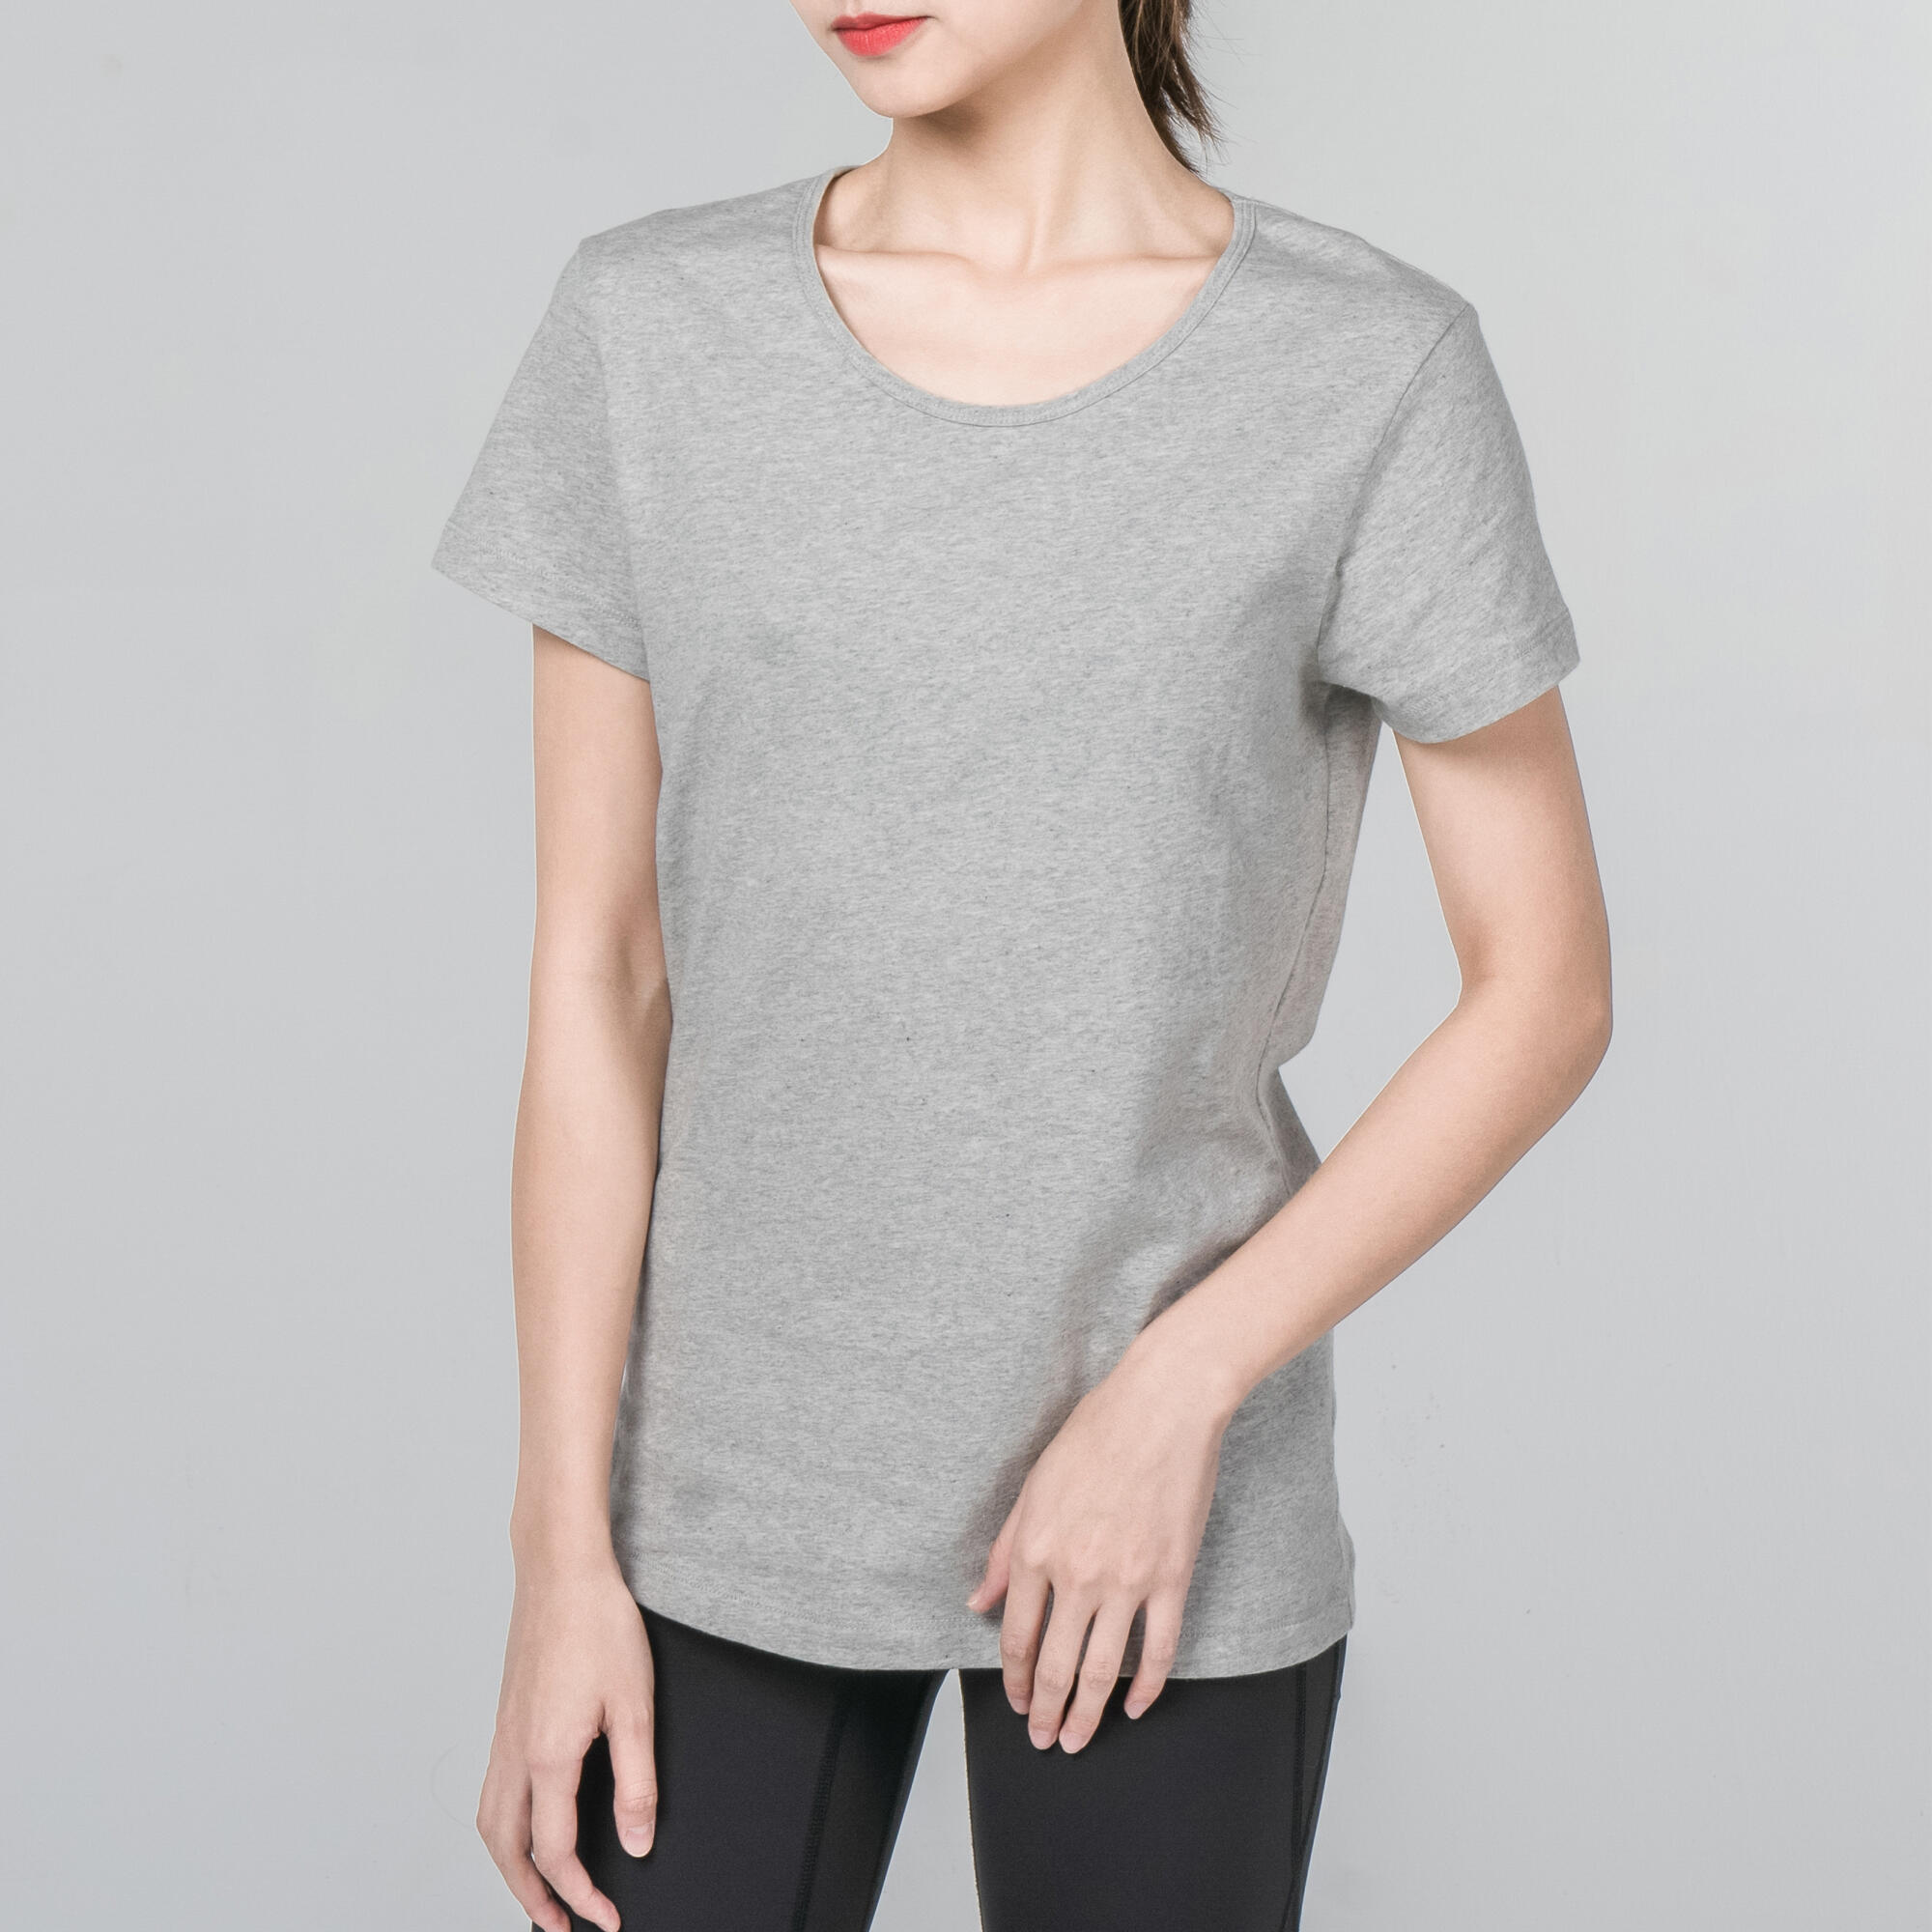 JDEFEG Woman S Workout Top Womens Solid Color Large Loose Round Neck  Printed Short Sleeved T Shirt 5X Tops for Women Plus Polyester,Cotton Dark  Gray M